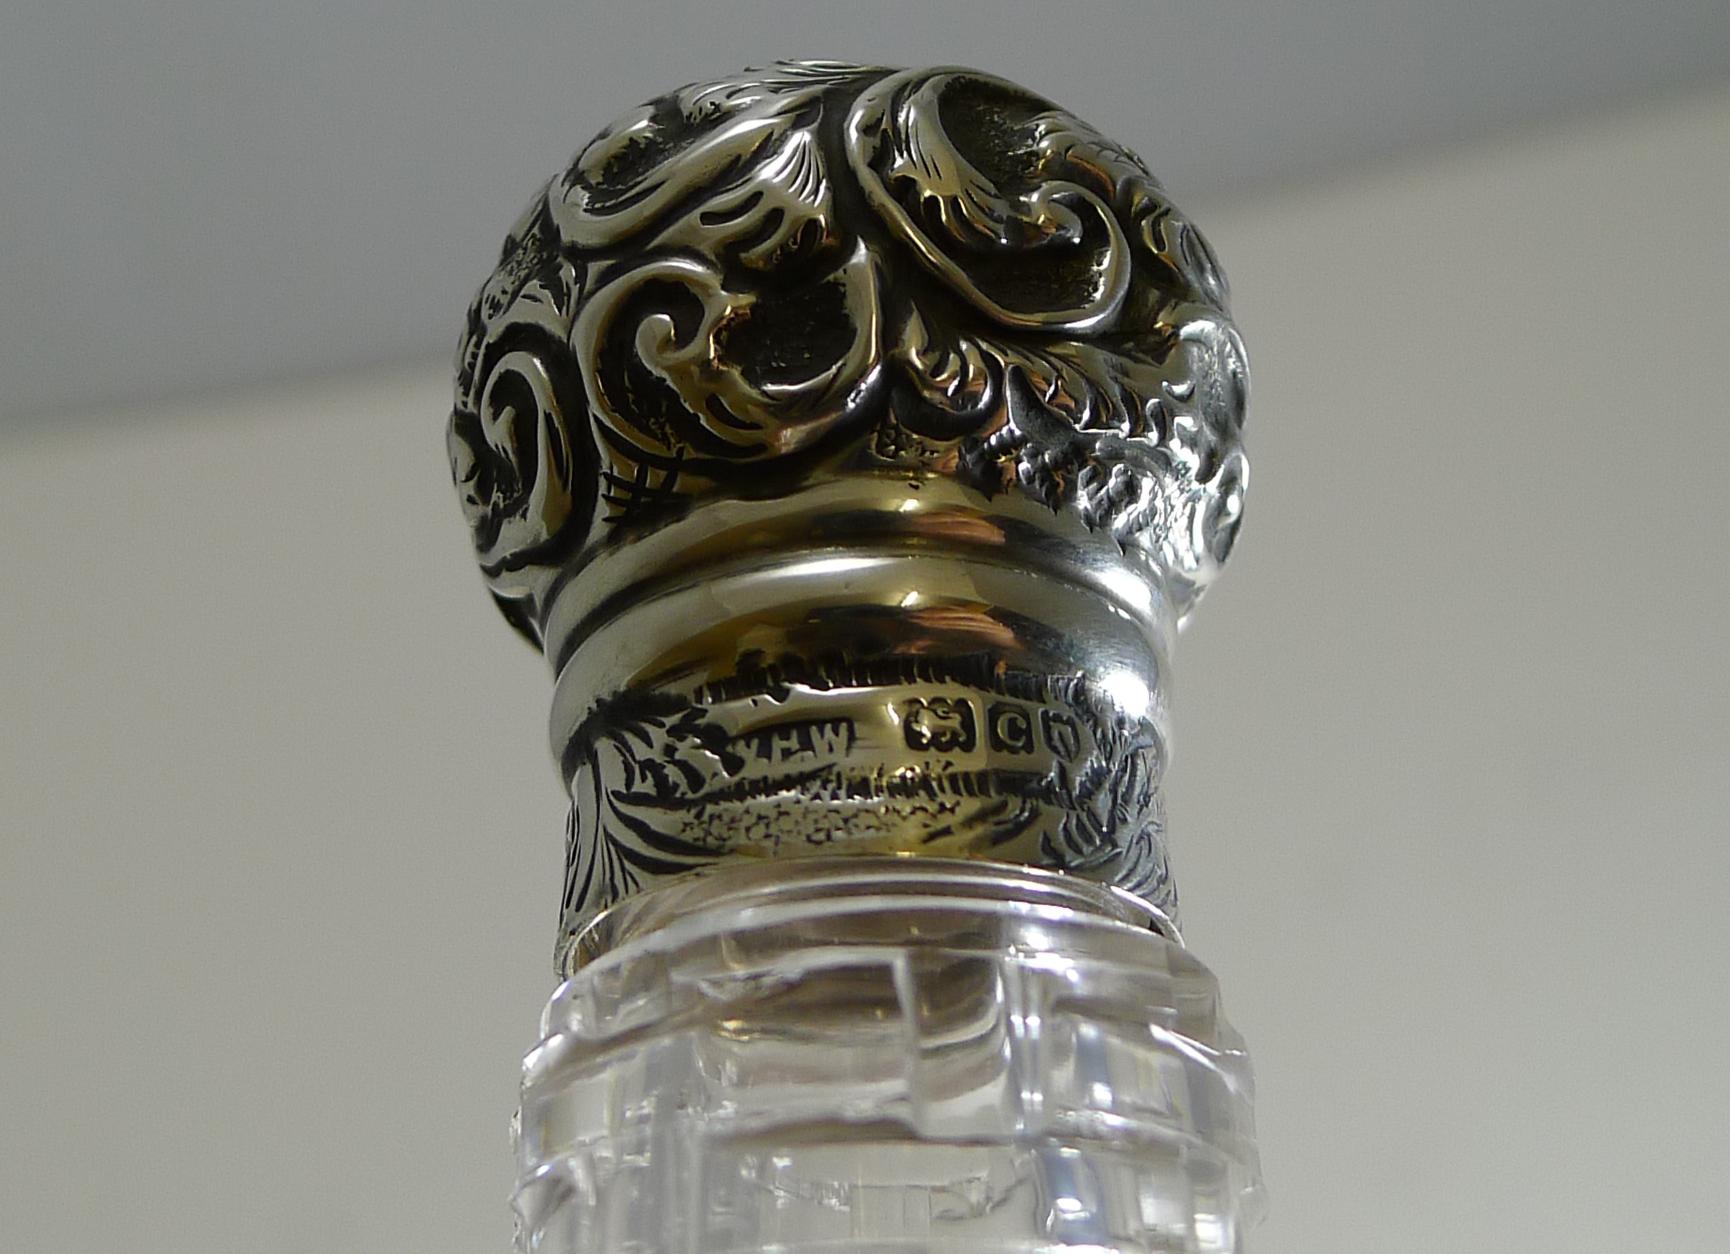 Antique English Sterling Silver Topped Miniature Champagne / Liquor Bottle, 1898 For Sale 1